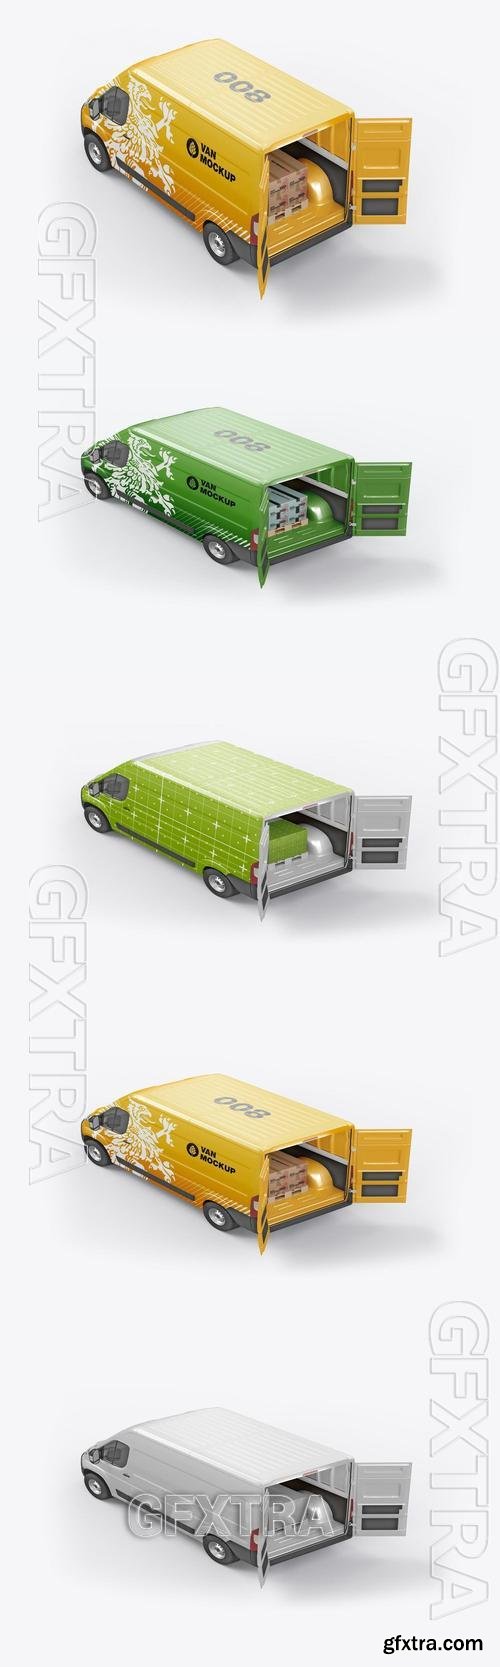 Panel Van with Pallet and Boxes Mockup G7F3B44